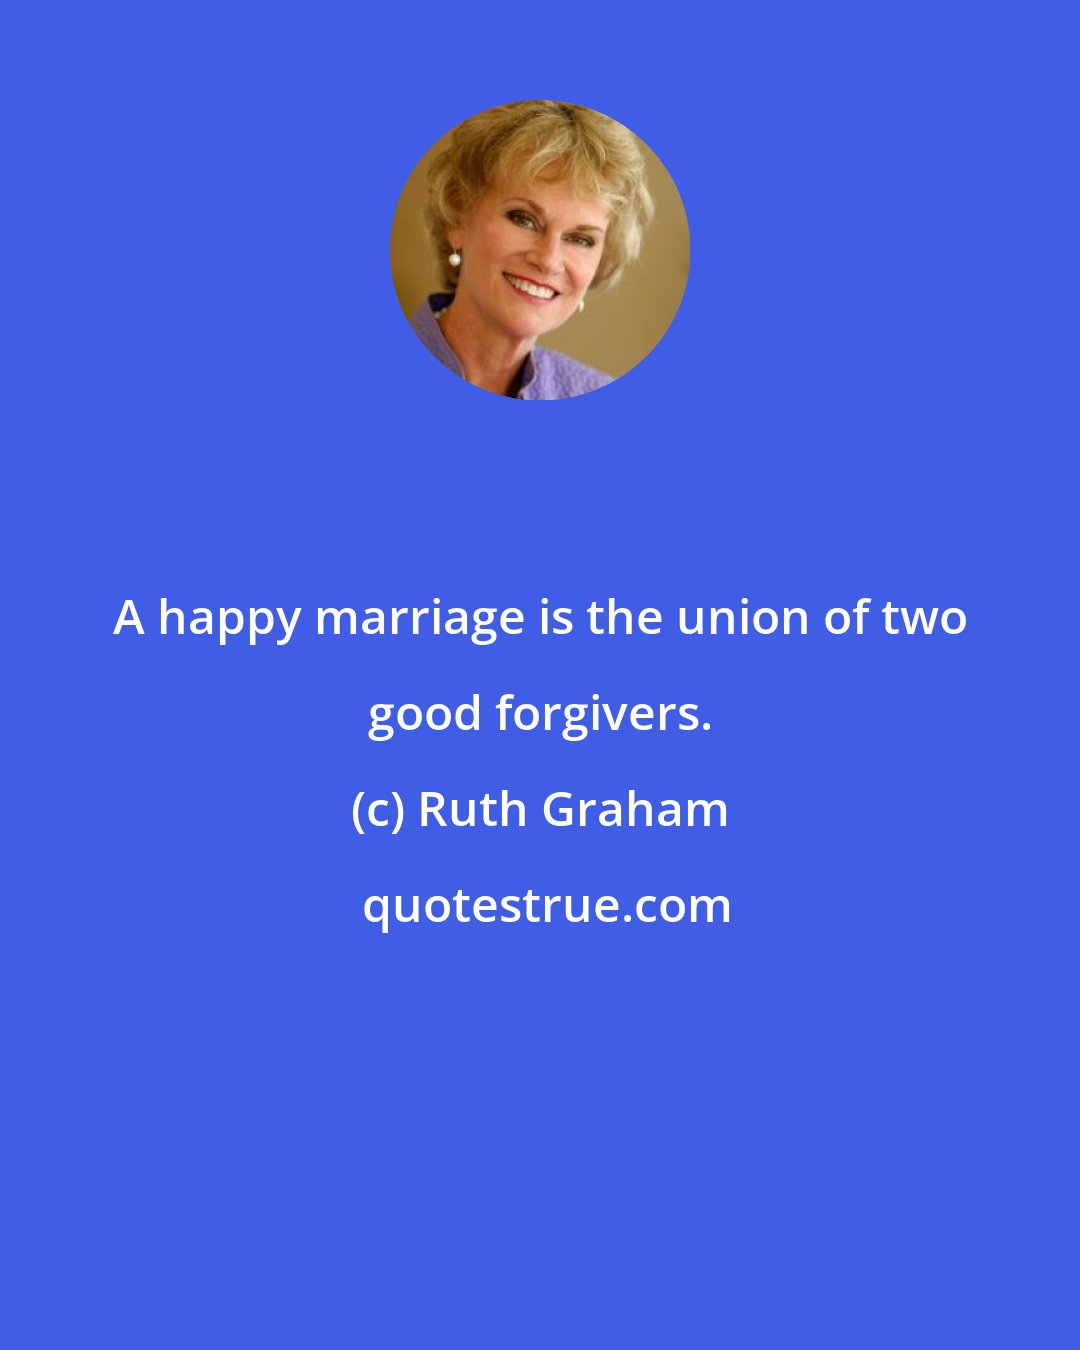 Ruth Graham: A happy marriage is the union of two good forgivers.